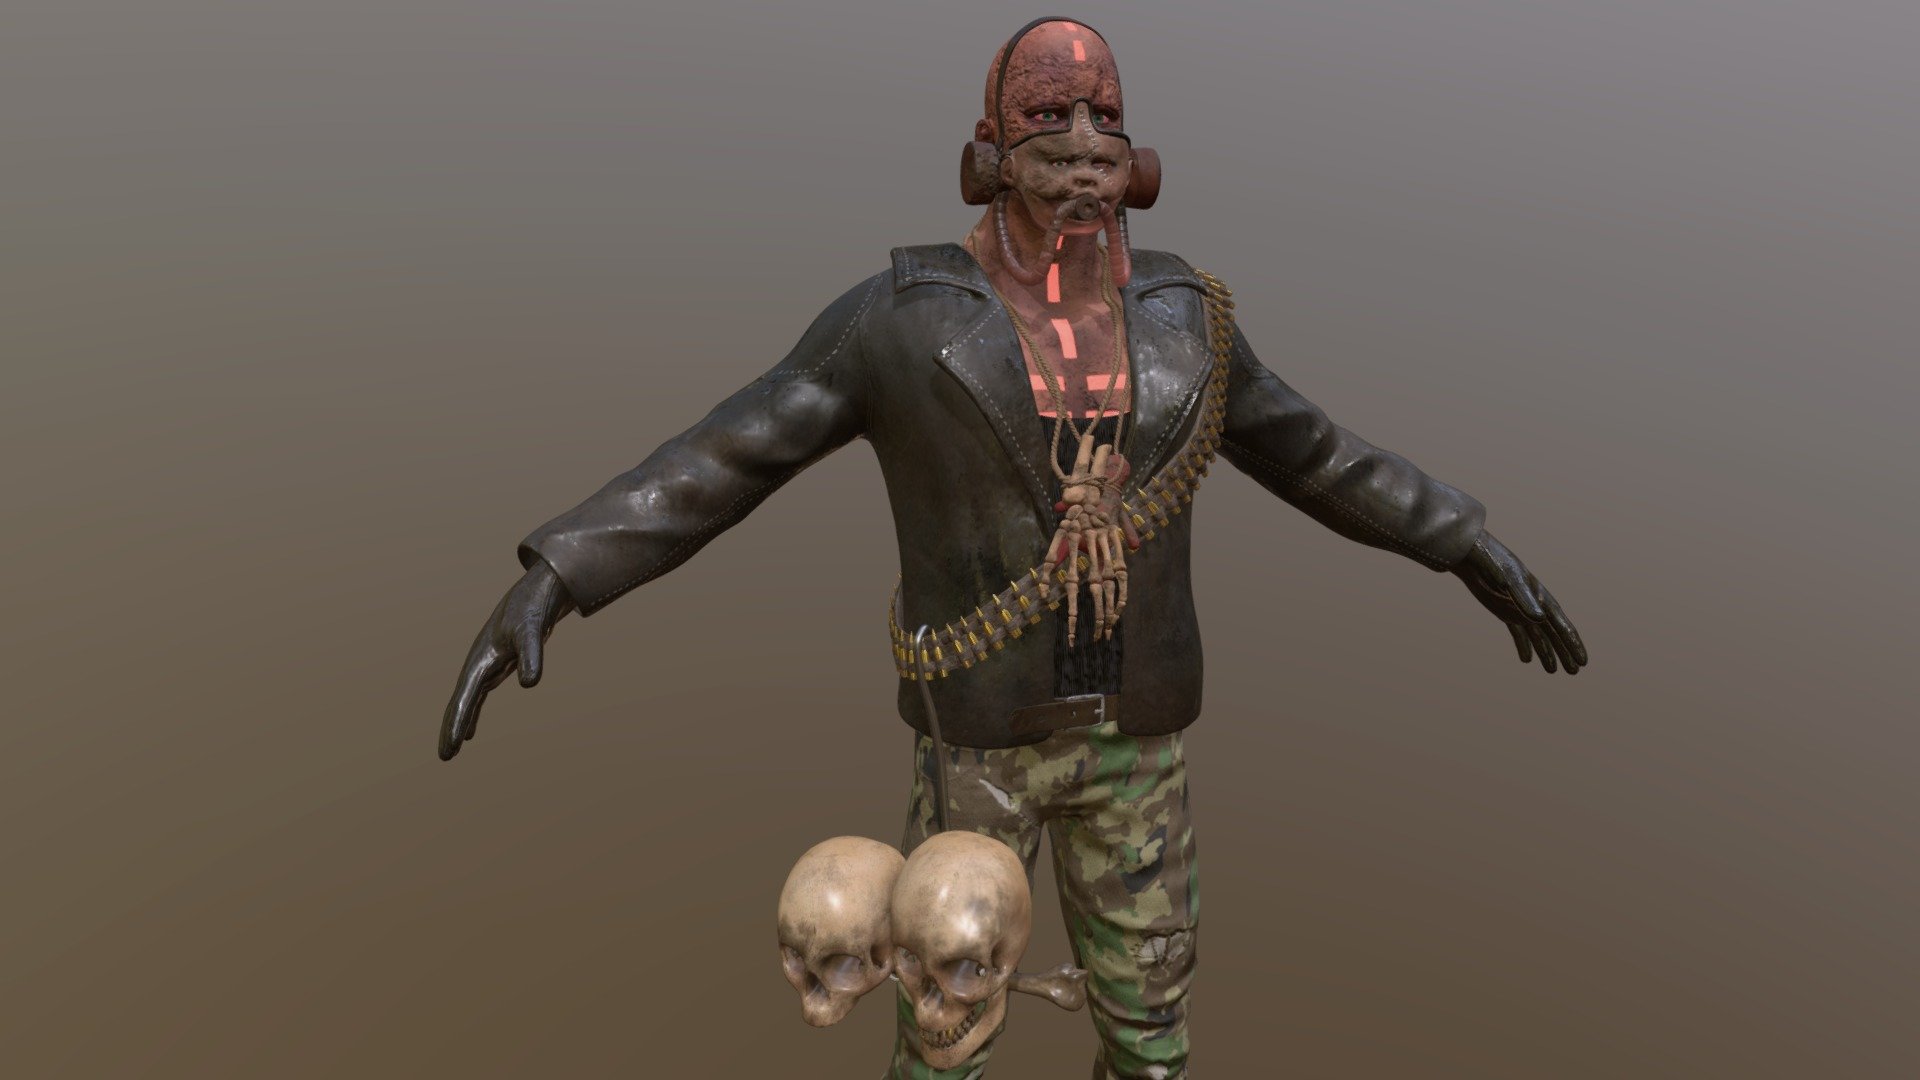 mad max style - Post apocalyptic character - 3D model by michaelmilly 3d model